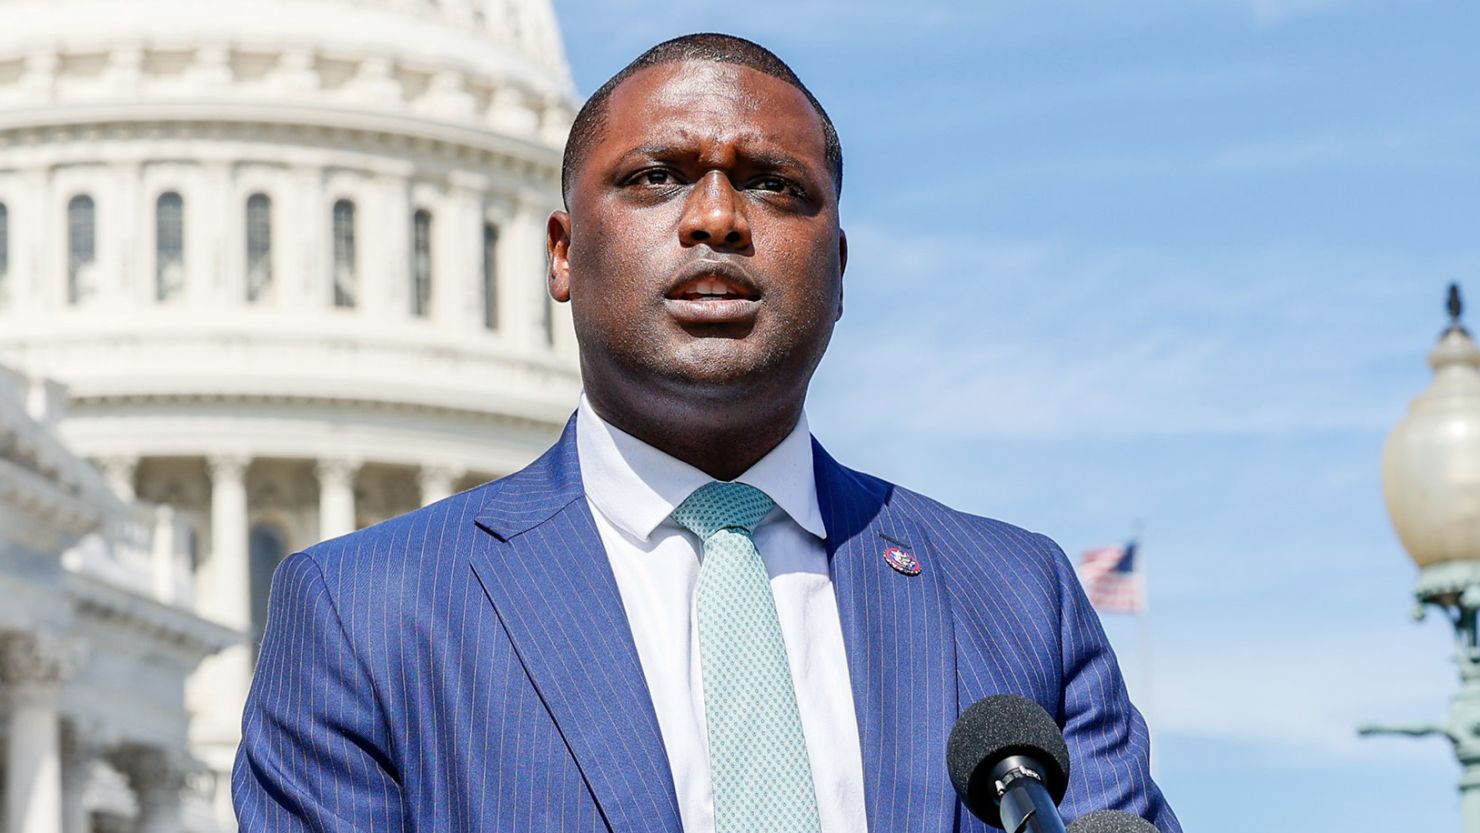 Rep. Mondaire Jones speaks during a news conference on Capitol Hill on September 29, 2022.